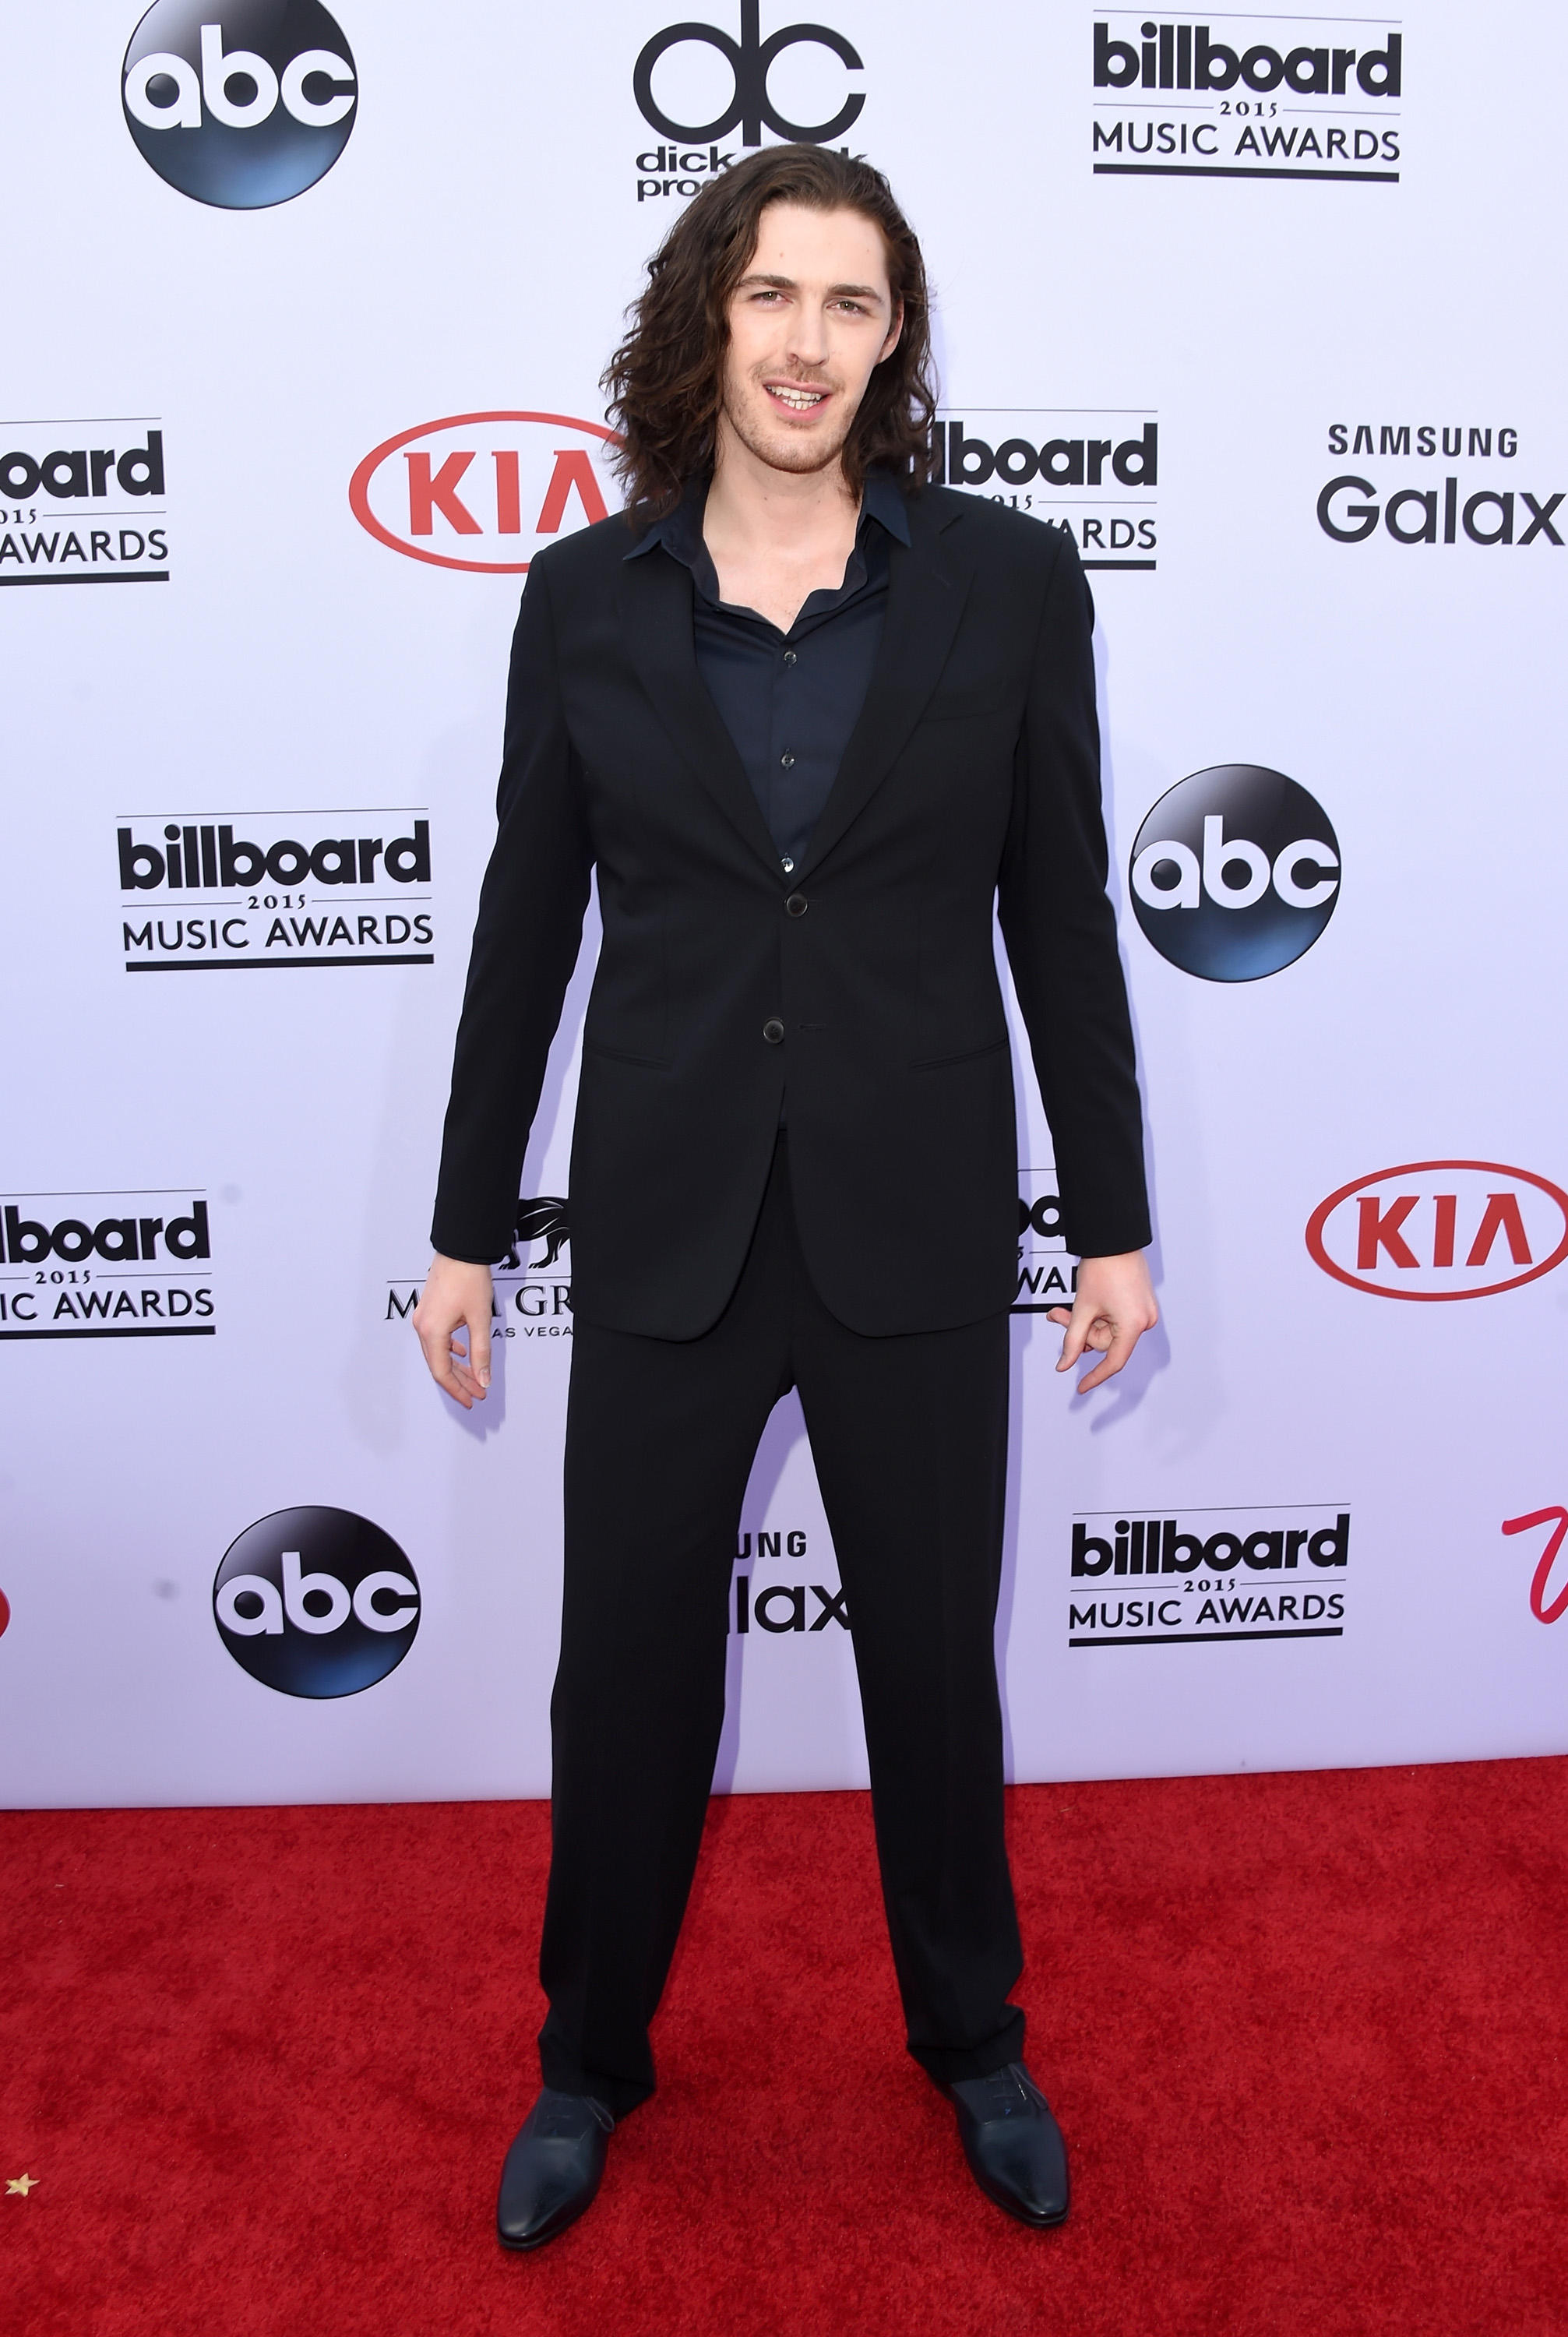 attends the 2015 Billboard Music Awards at MGM Grand Garden Arena on May 17, 2015 in Las Vegas, Nevada.